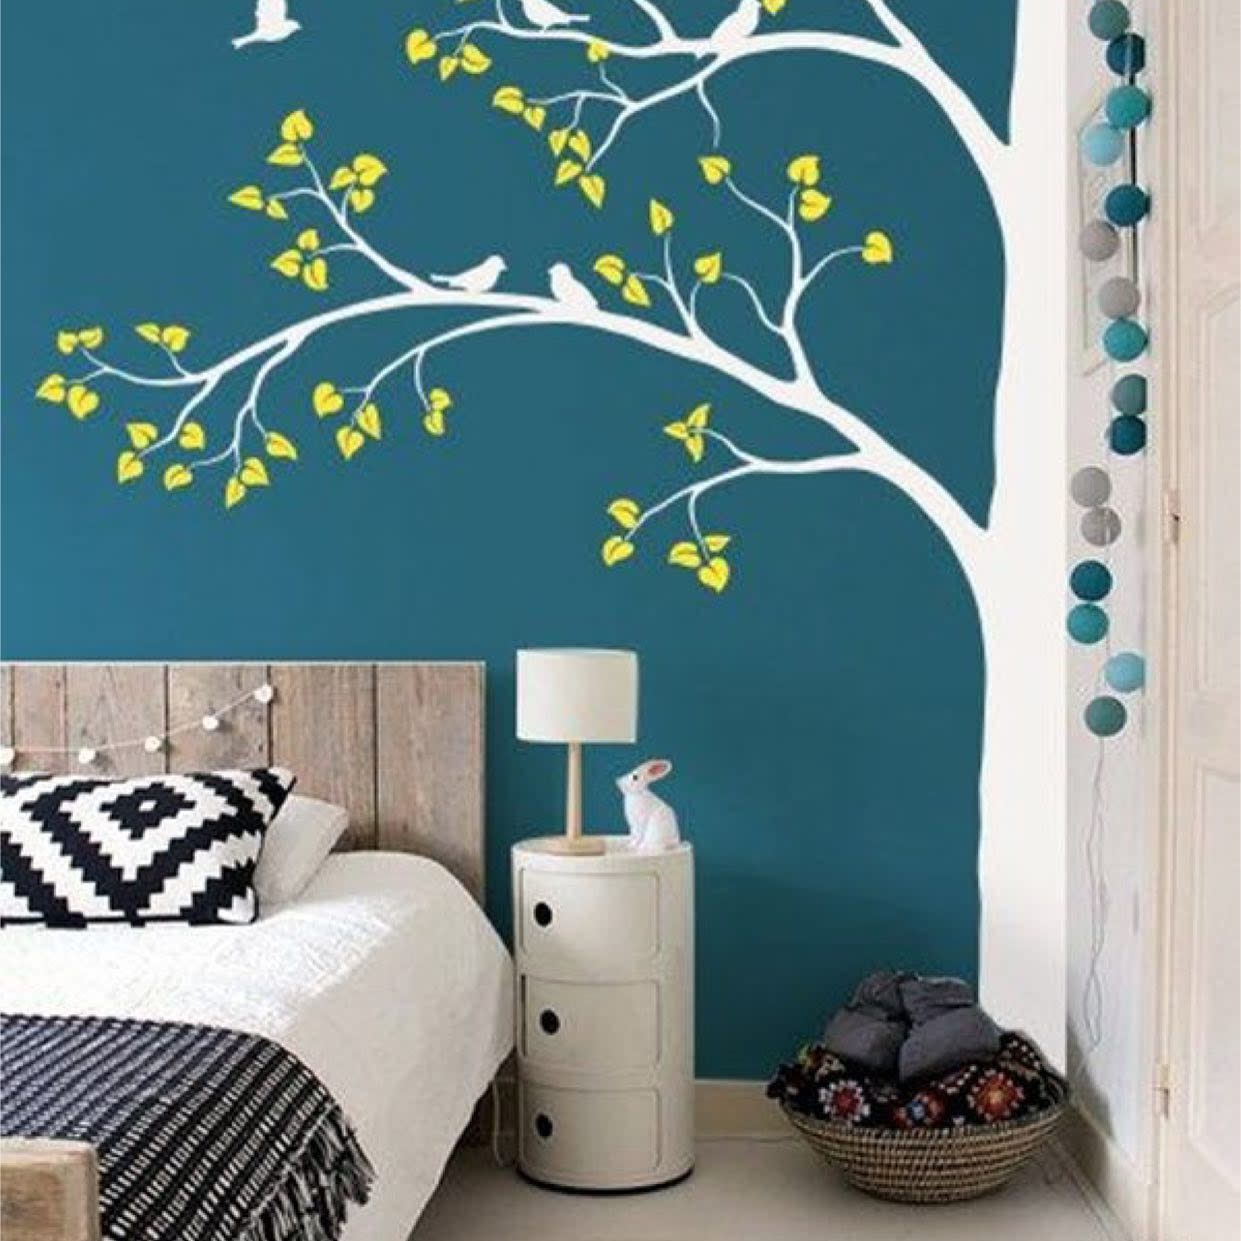 The Top 42 Wall Painting Ideas - Next Luxury